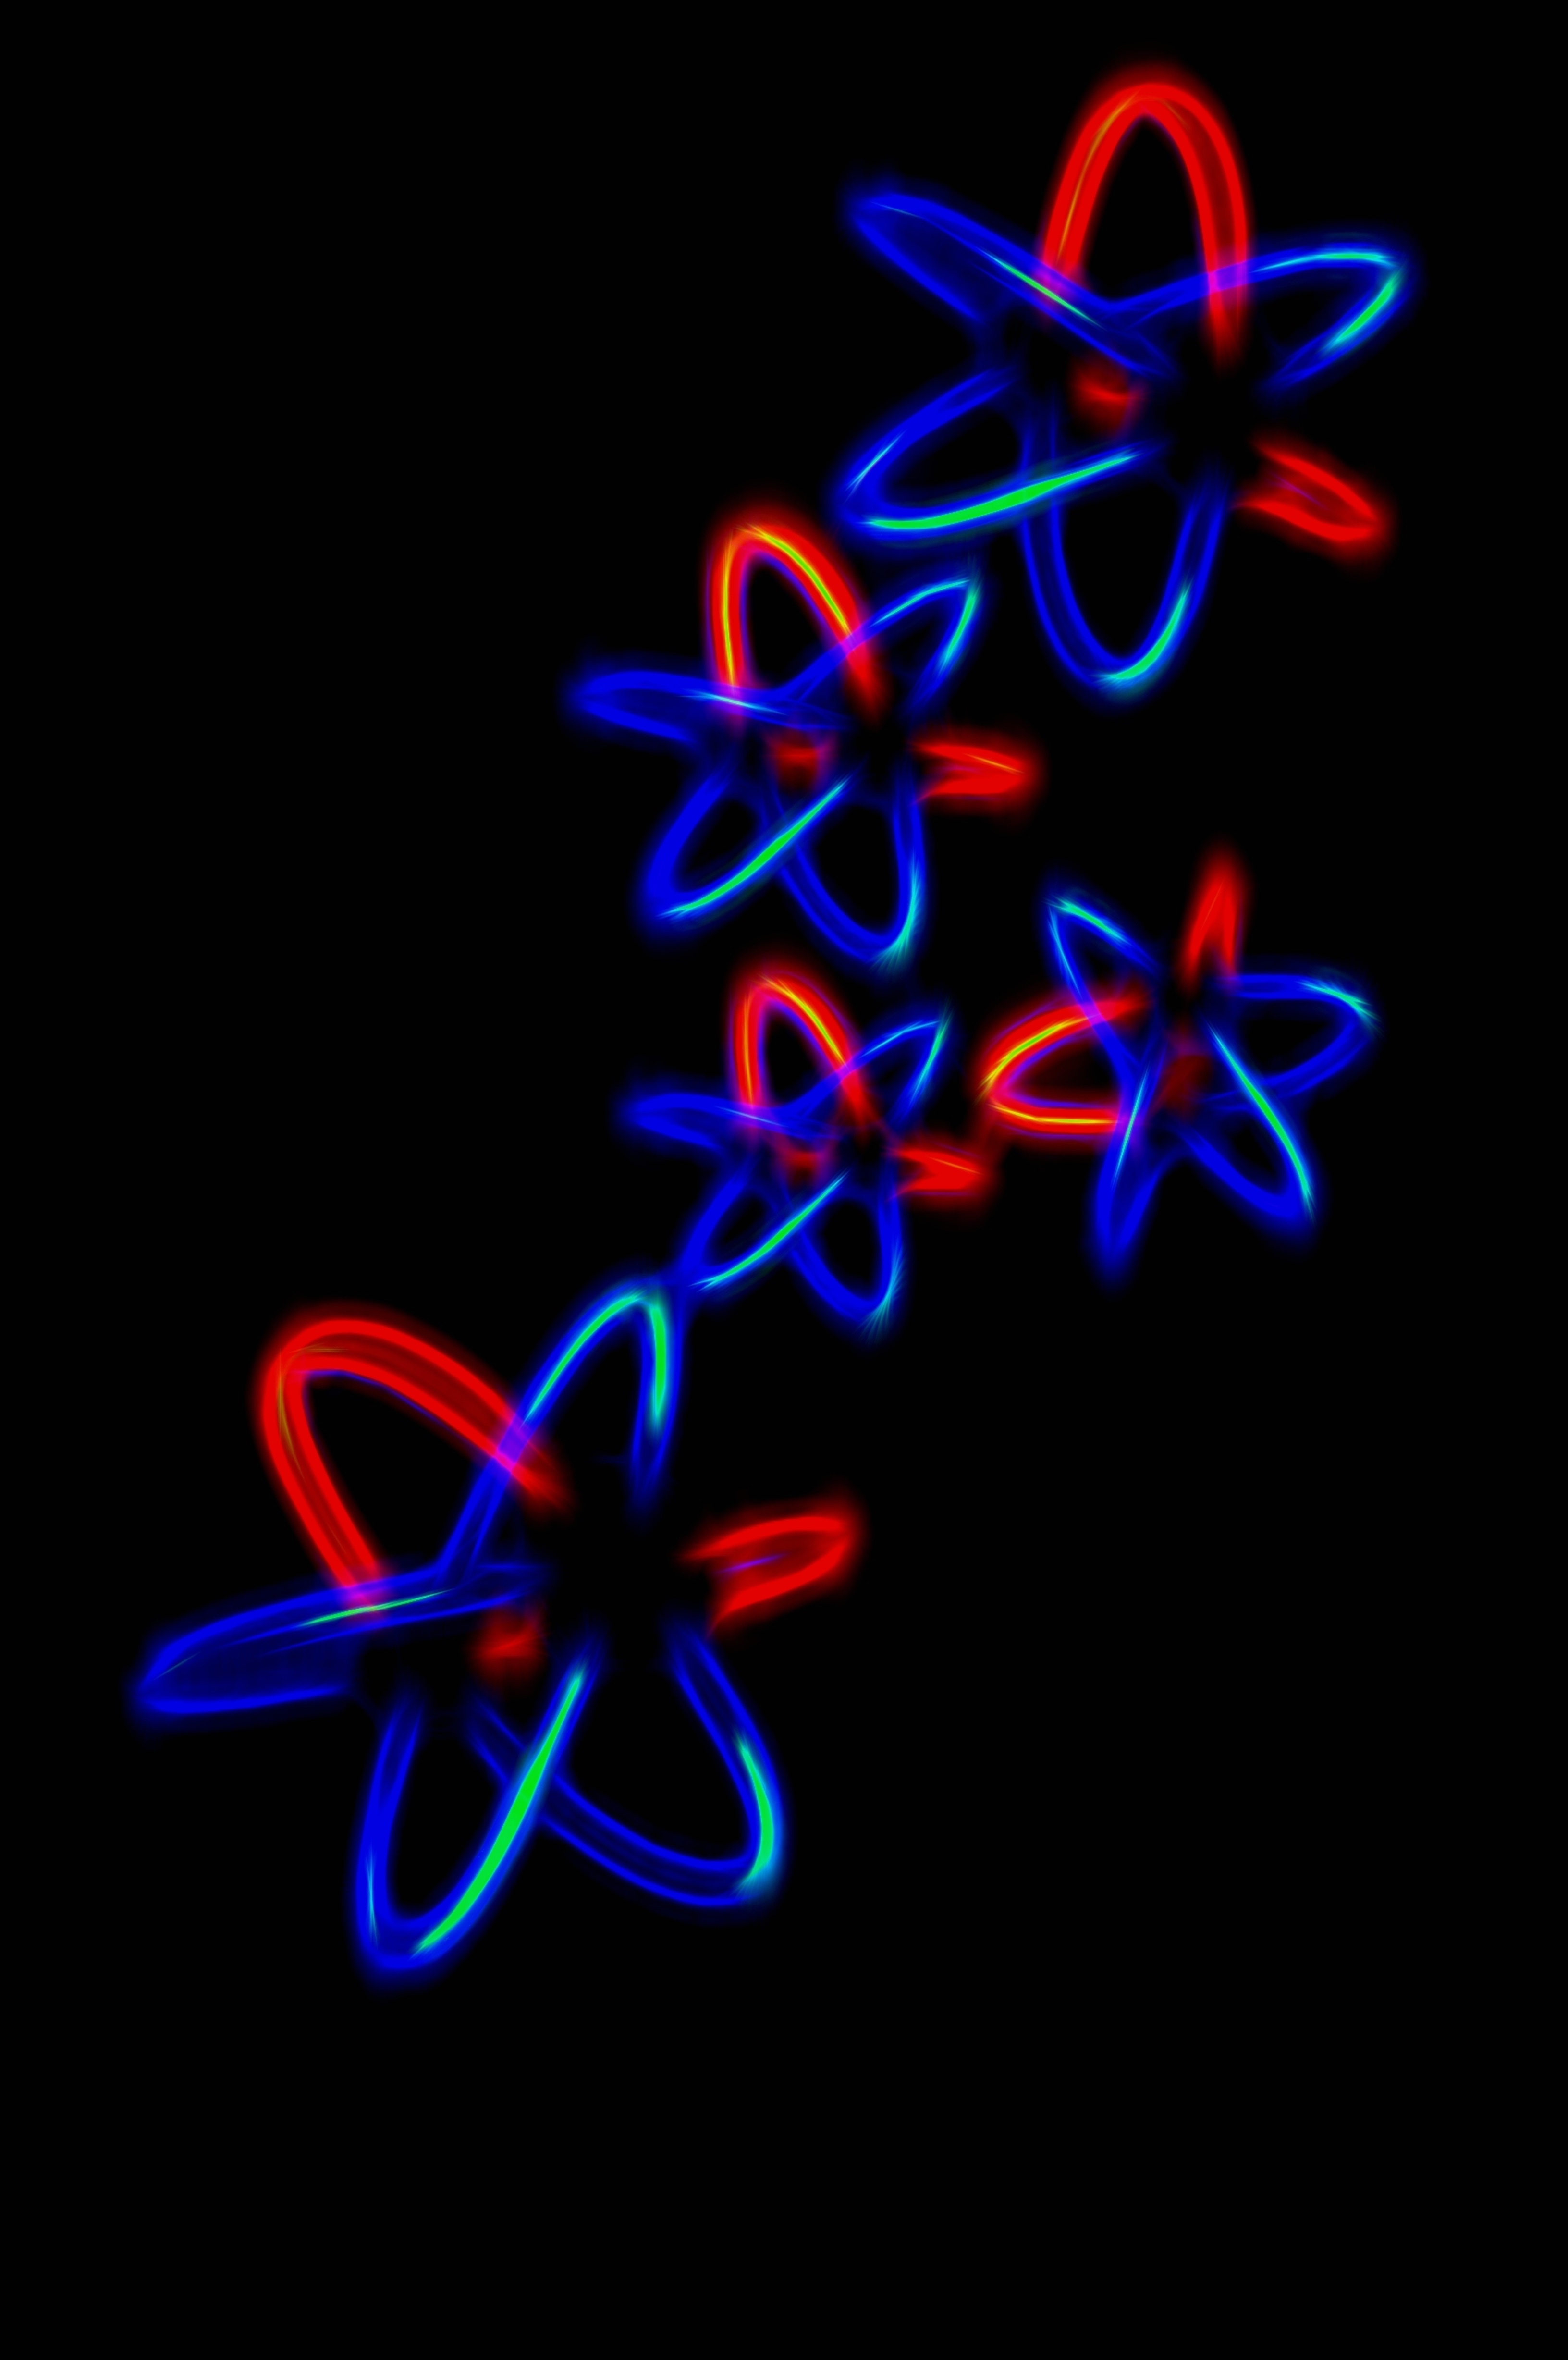 molecules, abstract, blue, red, neon, connections, connection, atoms